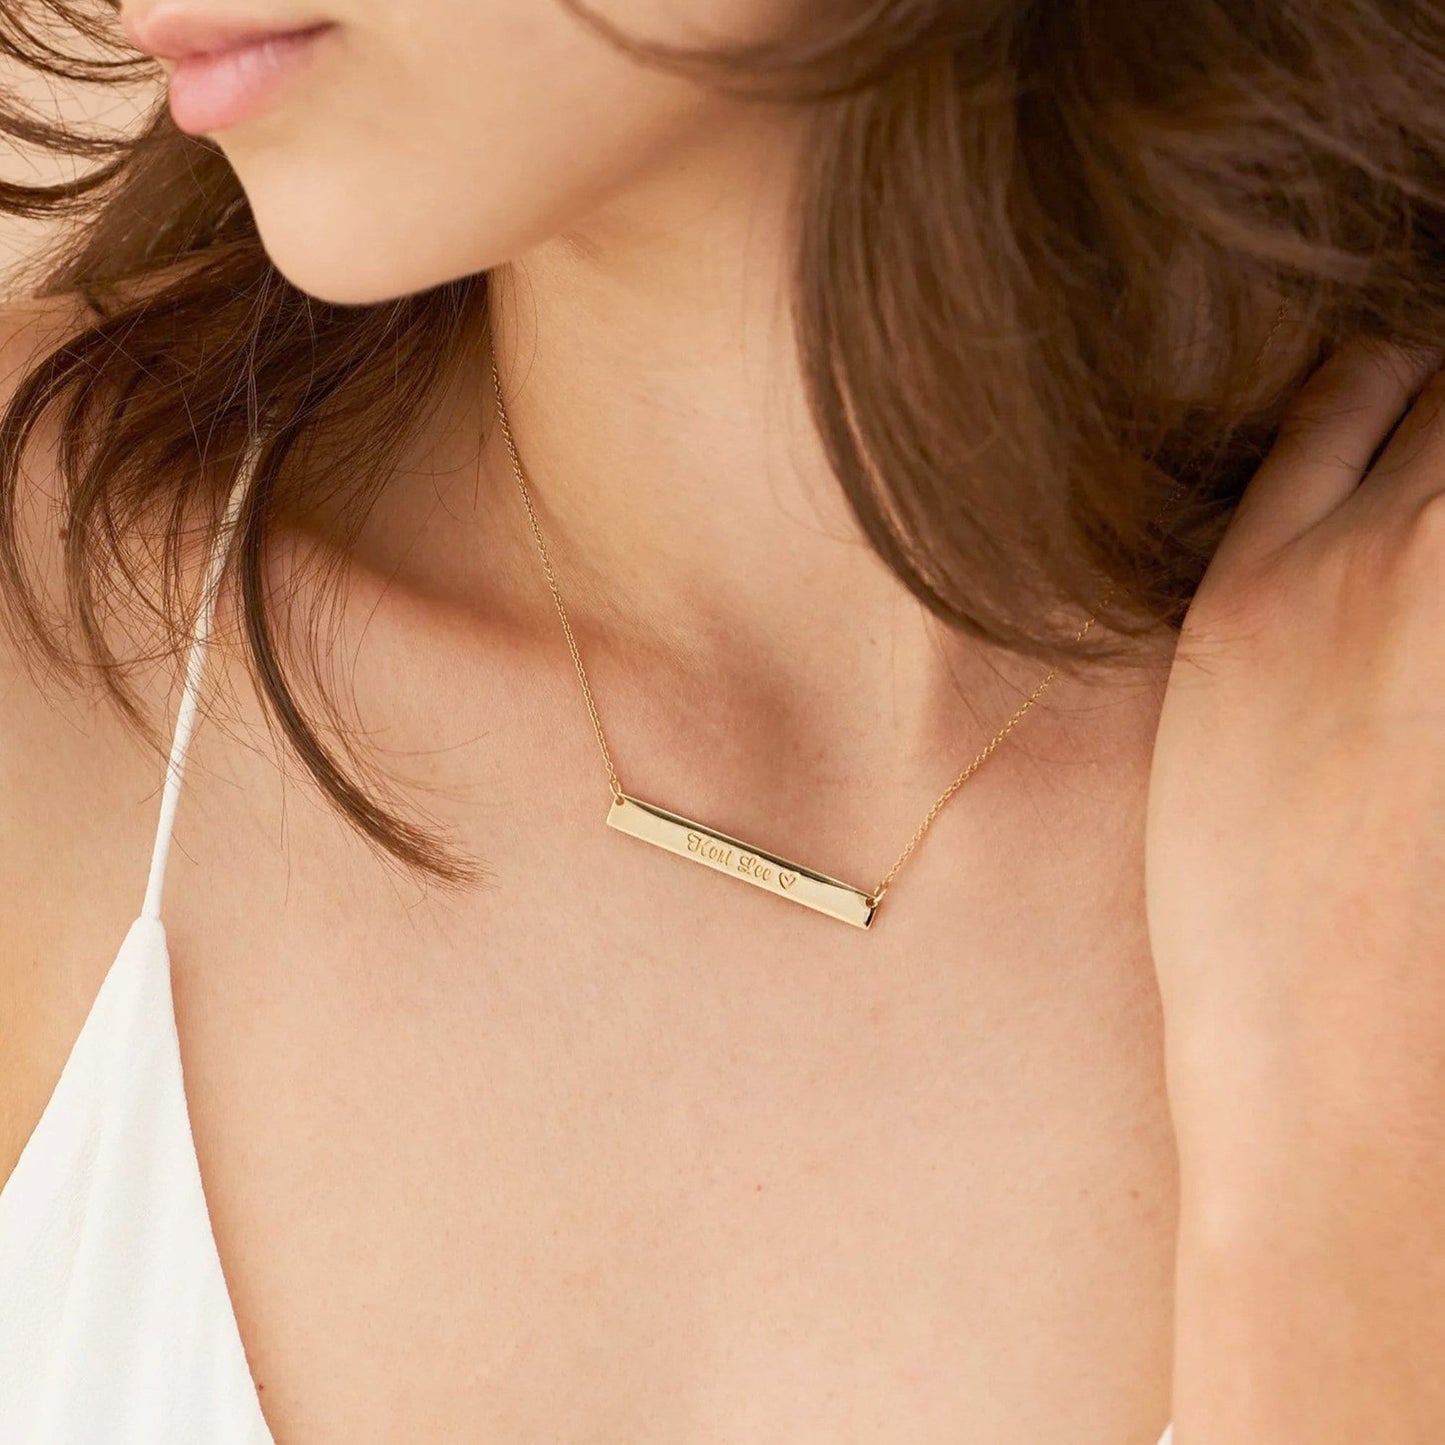 Dainty Bar Name Necklace by Caitlyn Minimalist • Custom Bar Pendant Necklace with solid gold Chain • Personalized Jewelry • Mom Gift